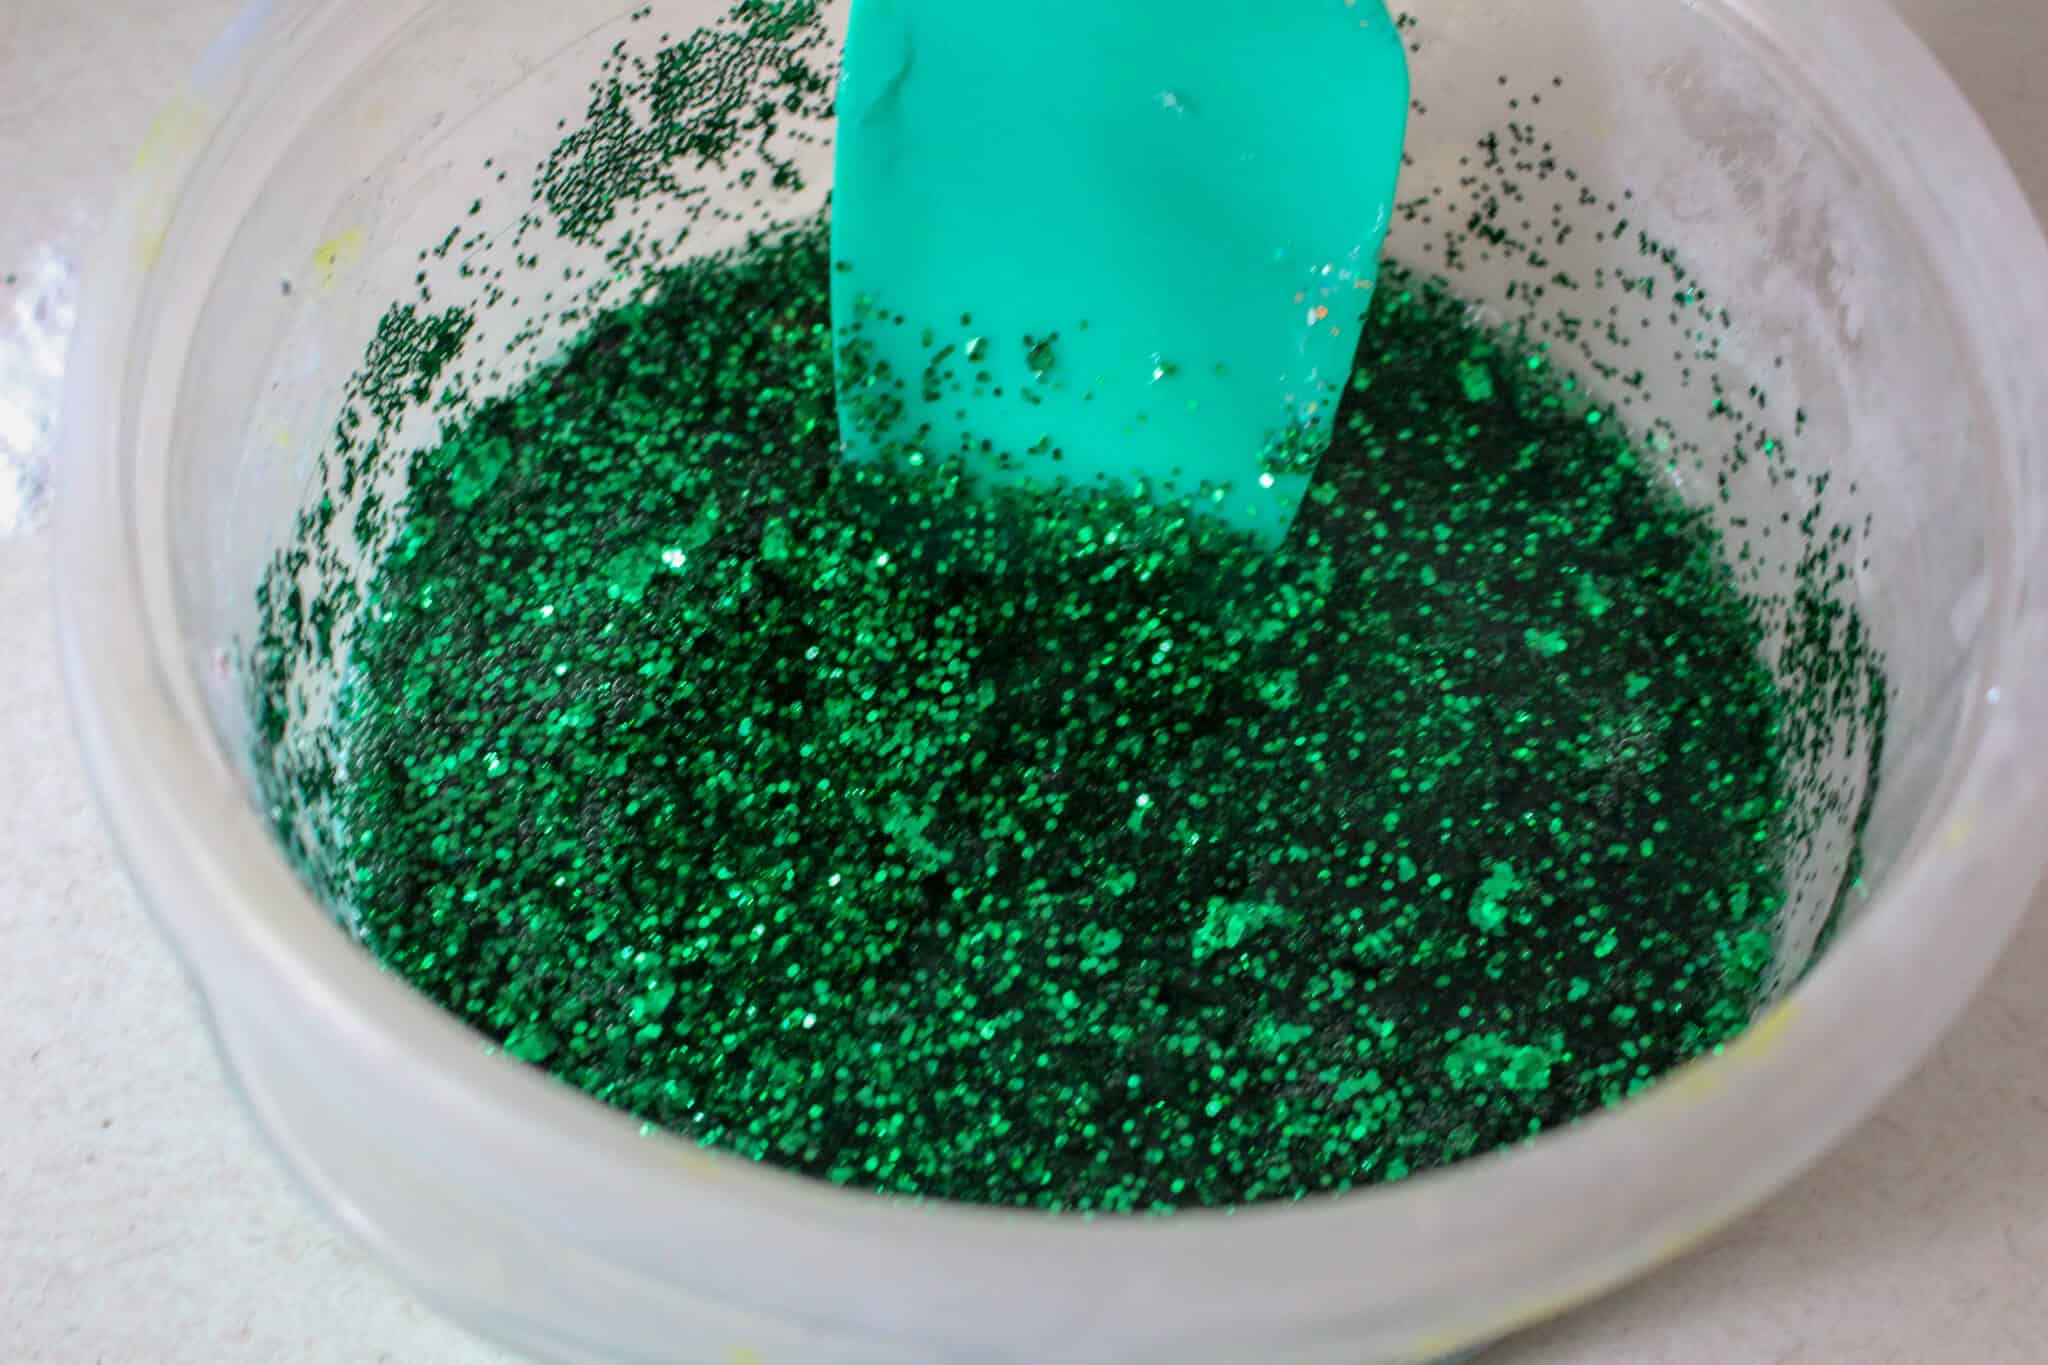 Everyone's favorite christmas movie, turned into a DIY Christmas Slime! This Christmas Grinch Slime is the perfect craft for the Christmas season! #christmas #crafts #slime #christmasslime #christmascrafts #thegrinch